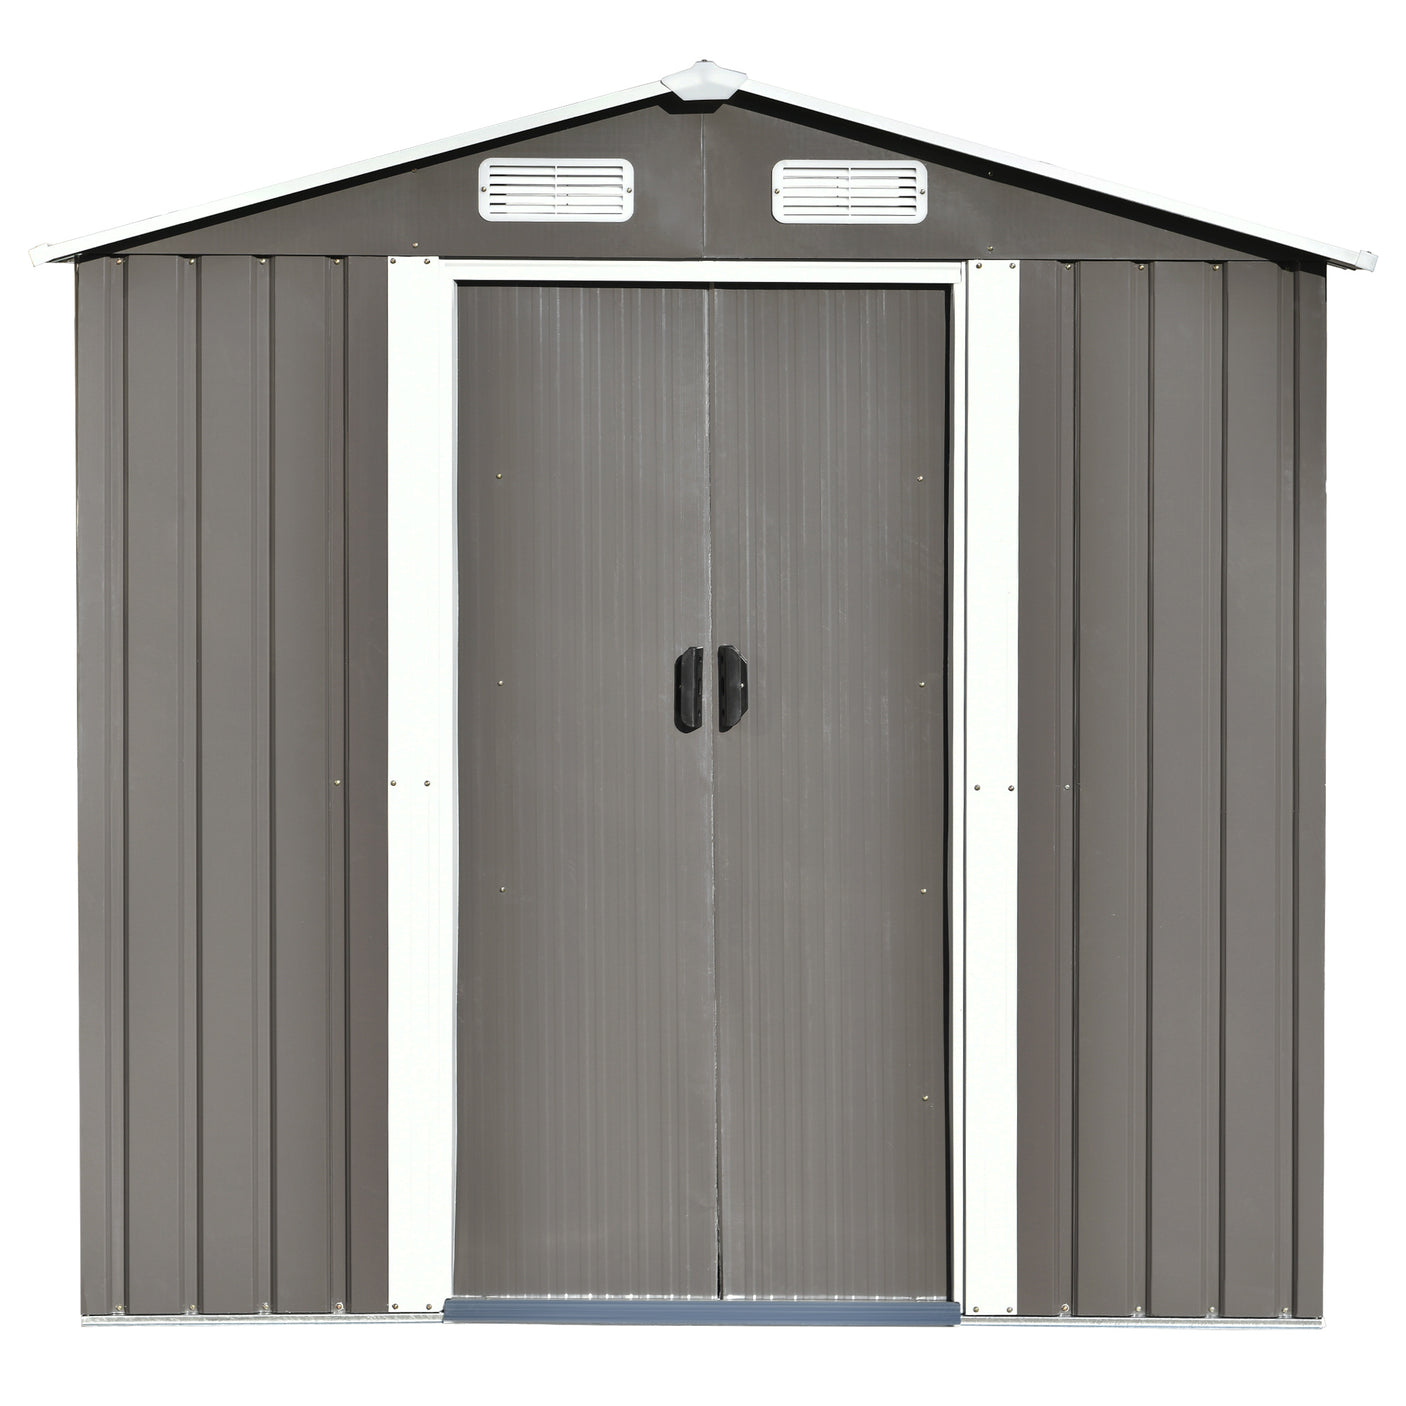 TOPMAX Patio 6ft x4ft Bike Shed Garden Shed, Metal Storage Shed with Adjustable Shelf and Lockable Door, Tool Cabinet with Vents and Foundation for Backyard, Lawn, Garden, Gray